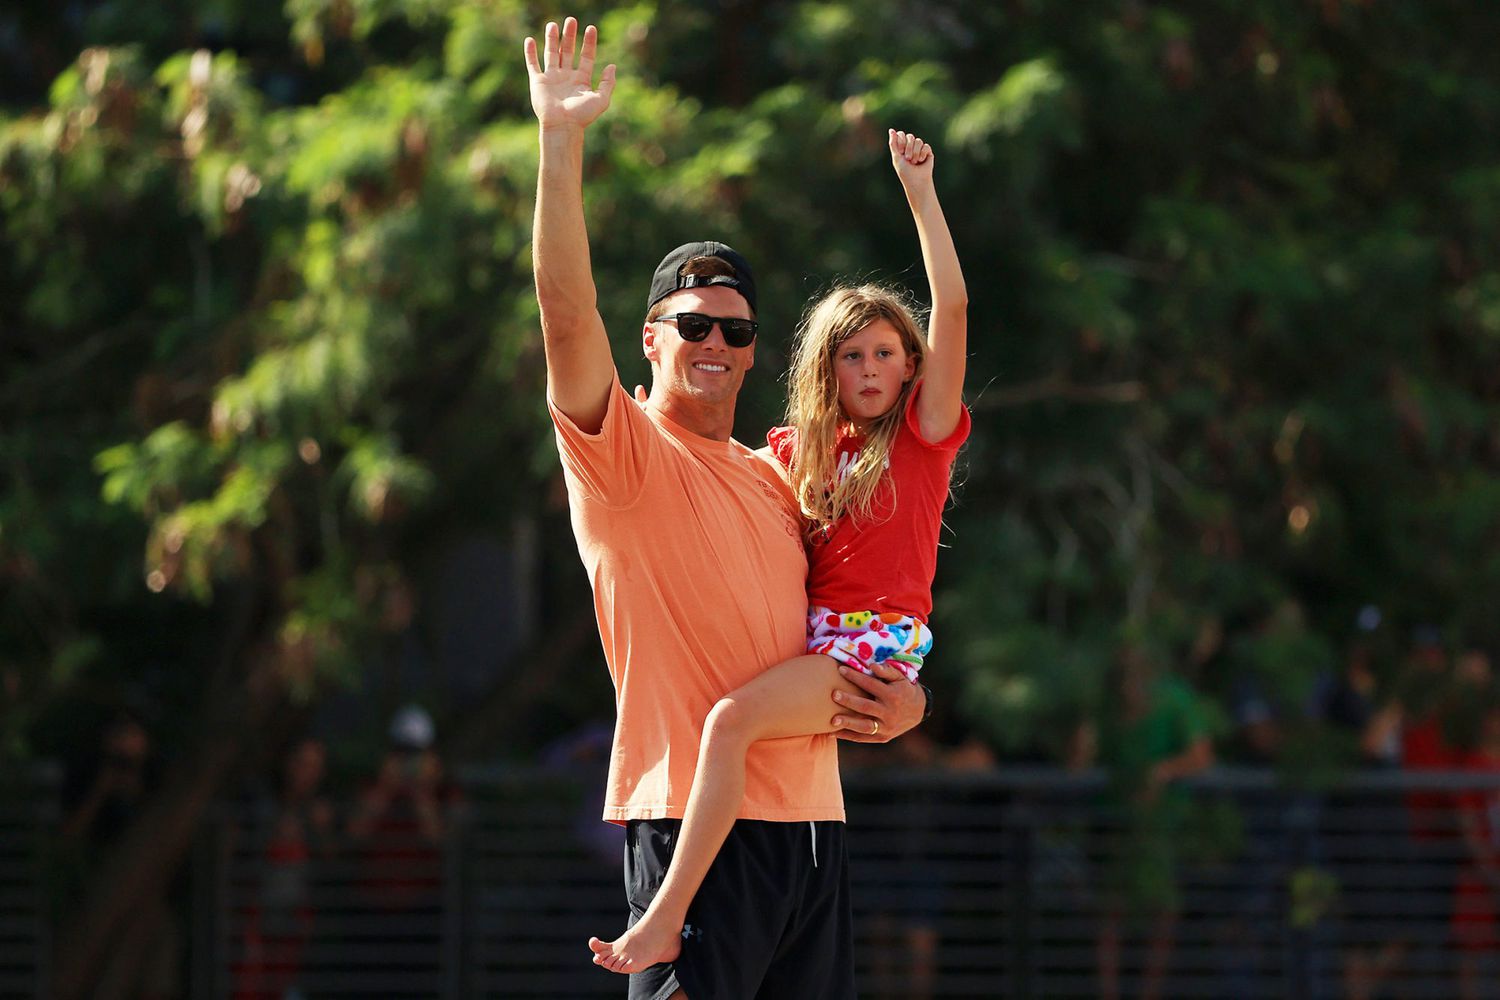 Tom Brady #12 of the Tampa Bay Buccaneers celebrates with his daughter Vivian during the Tampa Bay Buccaneers Super Bowl boat parade on February 10, 2021 after defeating the Kansas City Chiefs 31-9 in Super Bowl LV in Tampa, Florida